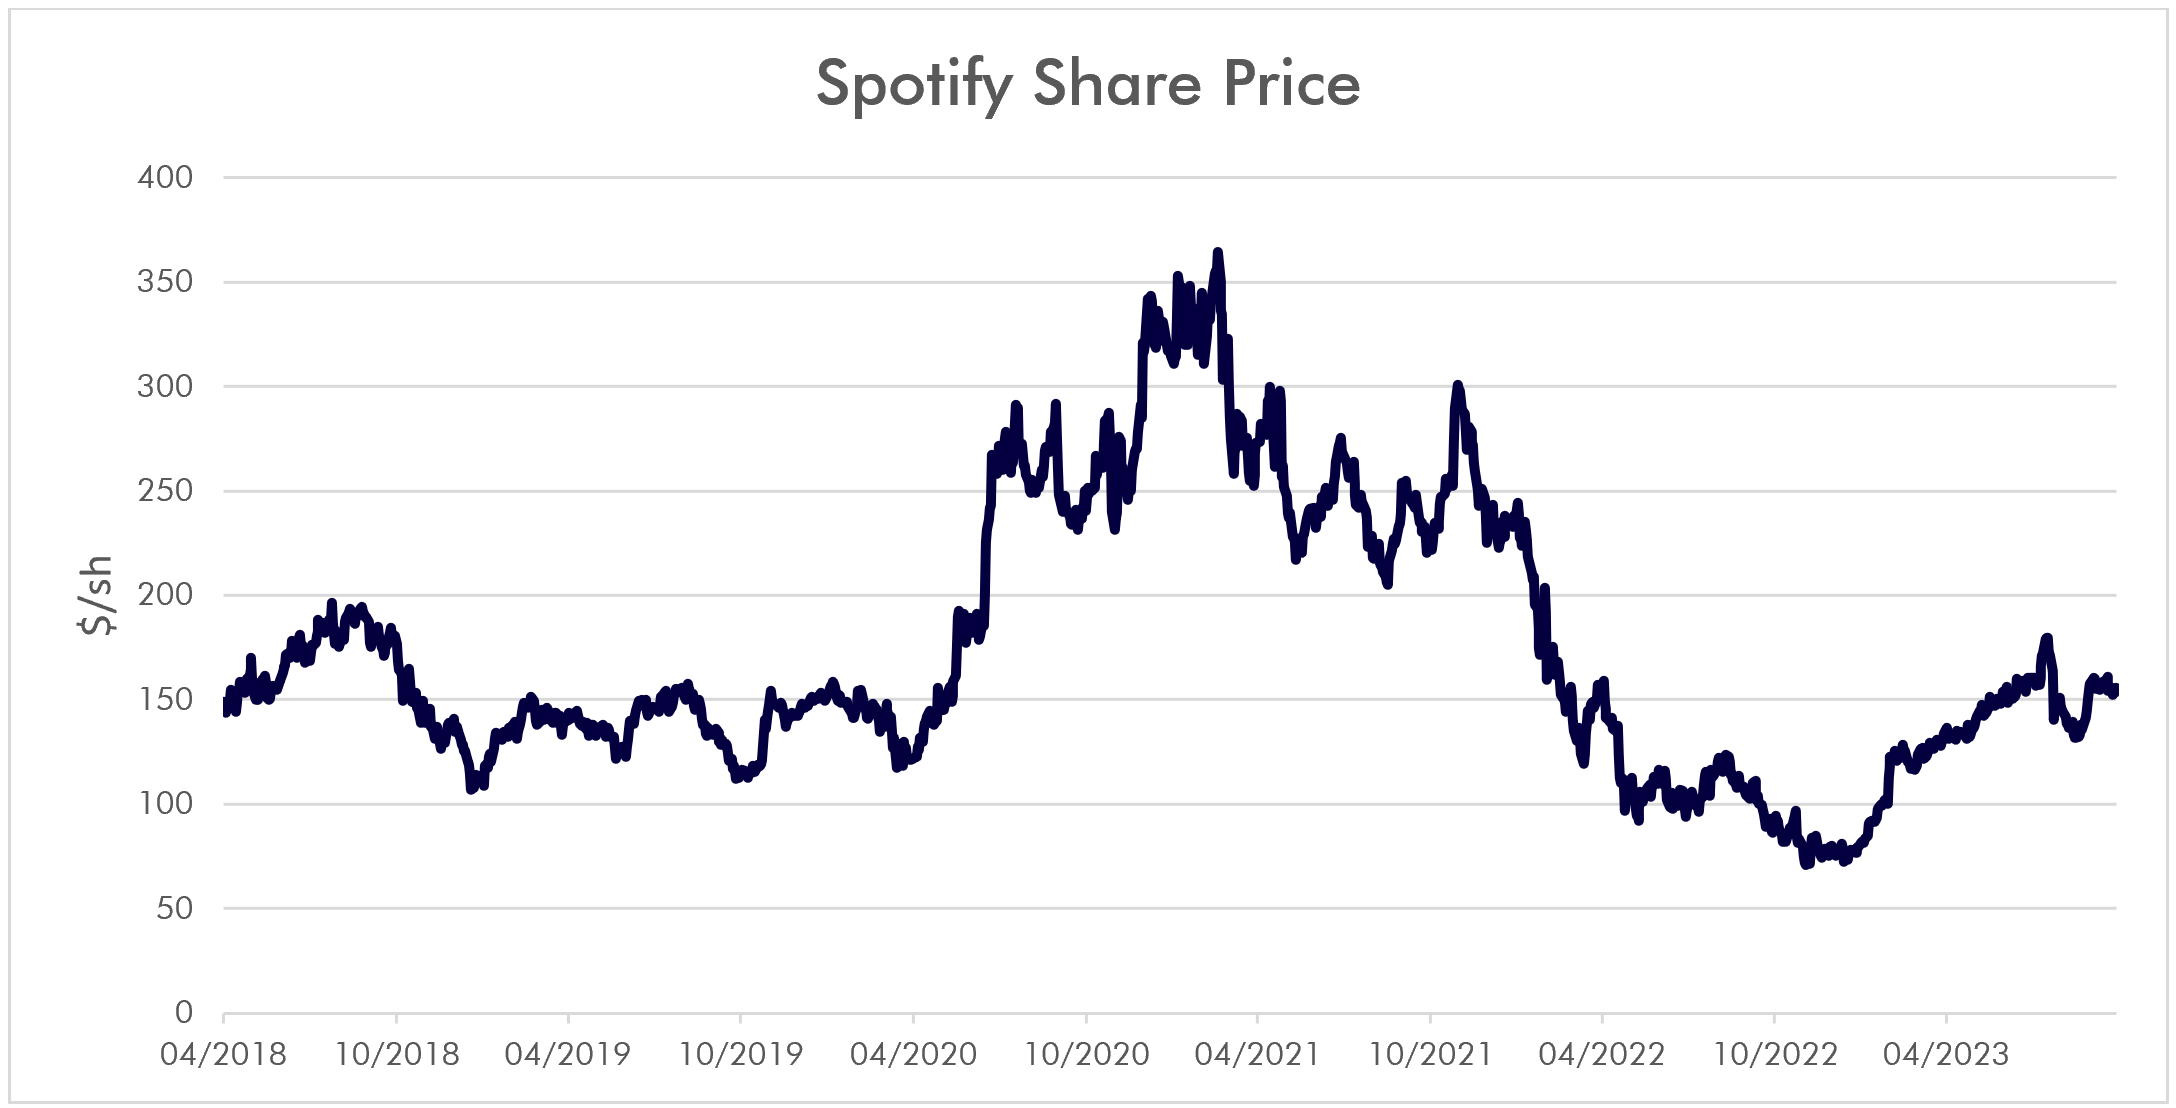 Spotify share price movement